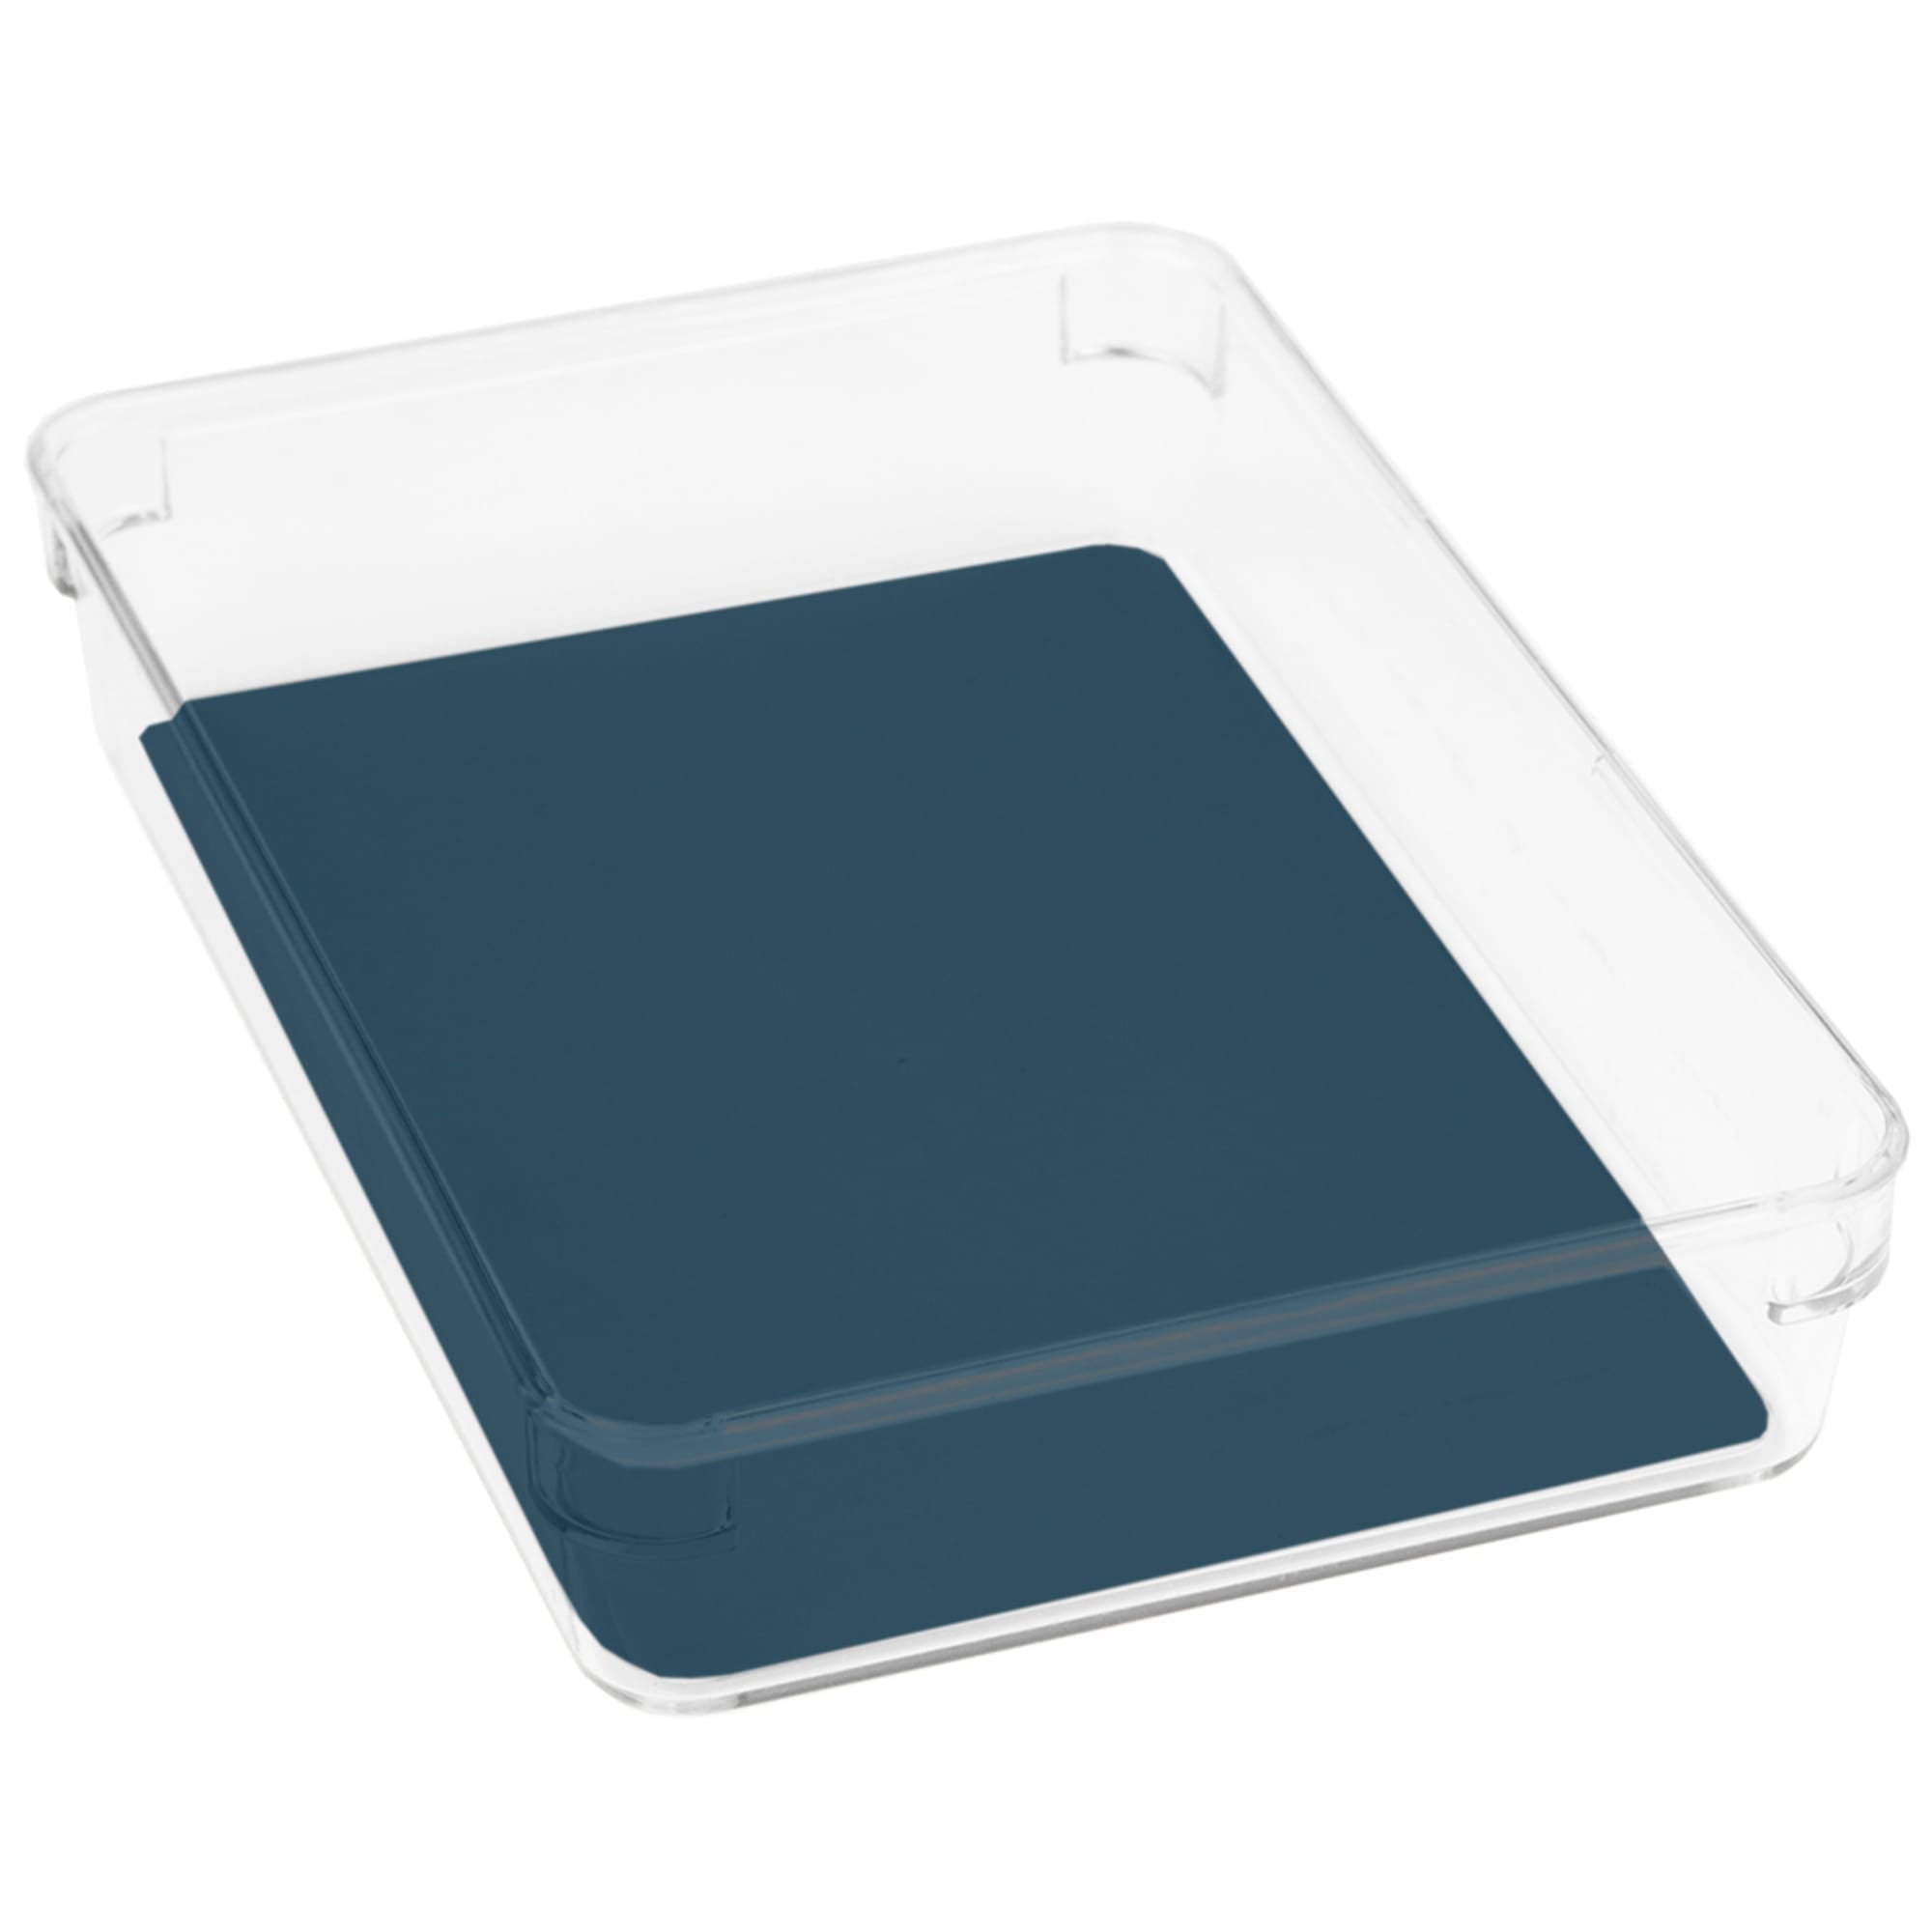 Michael Graves Design 9.5" x 6.5" Drawer Organizer with Indigo Rubber Lining $3.00 EACH, CASE PACK OF 24